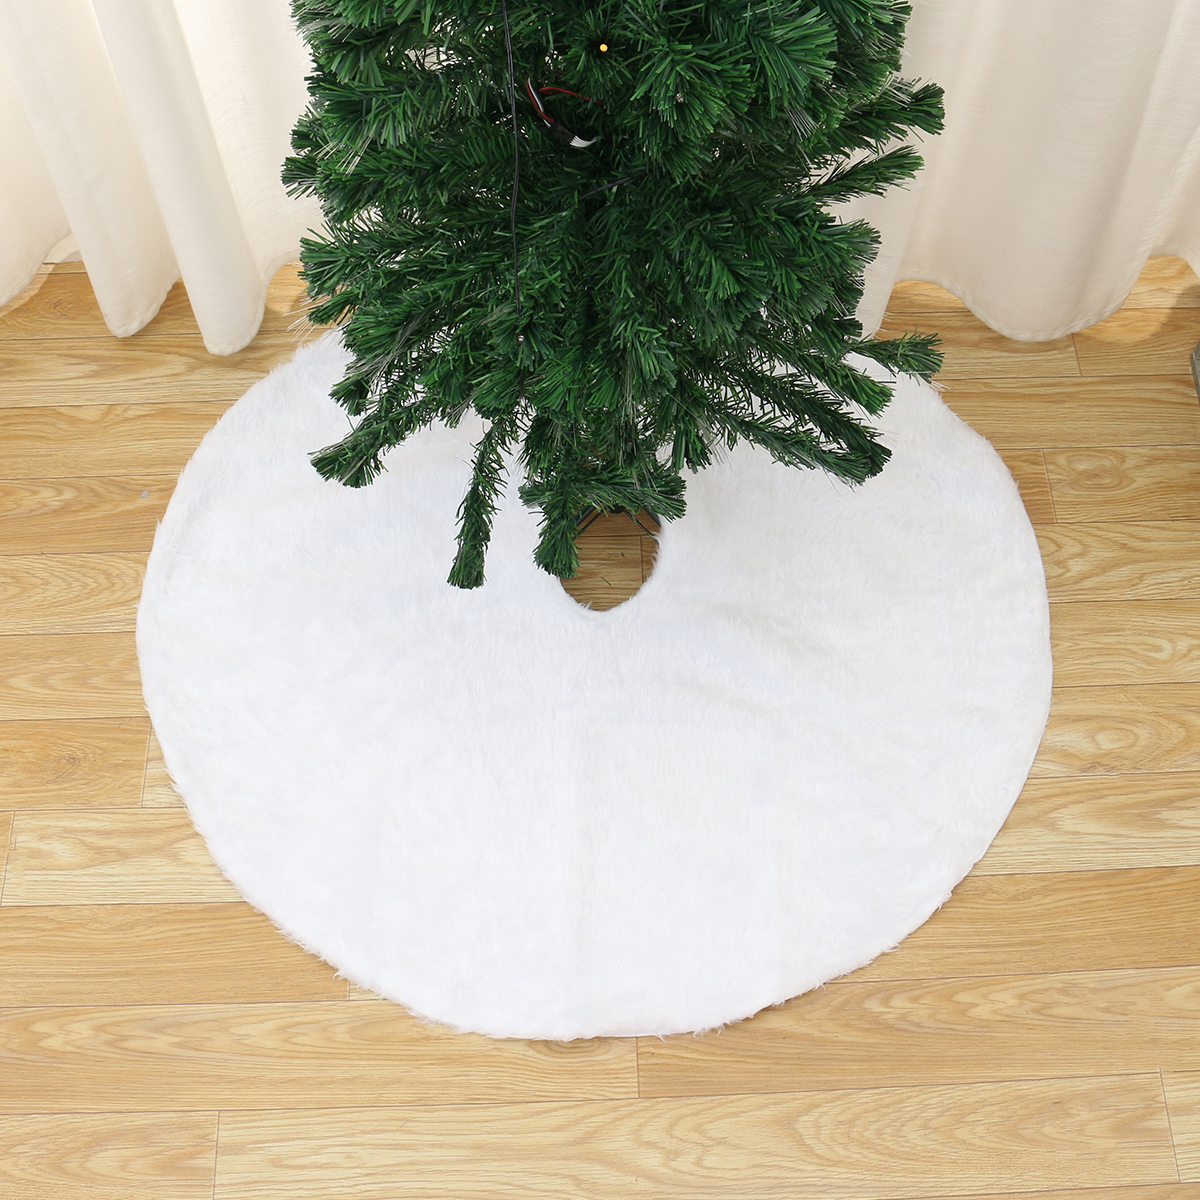 2020-Christmas-Tree-Skirts-White-Faux-Fur-Xmas-Tree-Decoration-Merry-Christmas-Supplies-for-New-Year-1772186-8